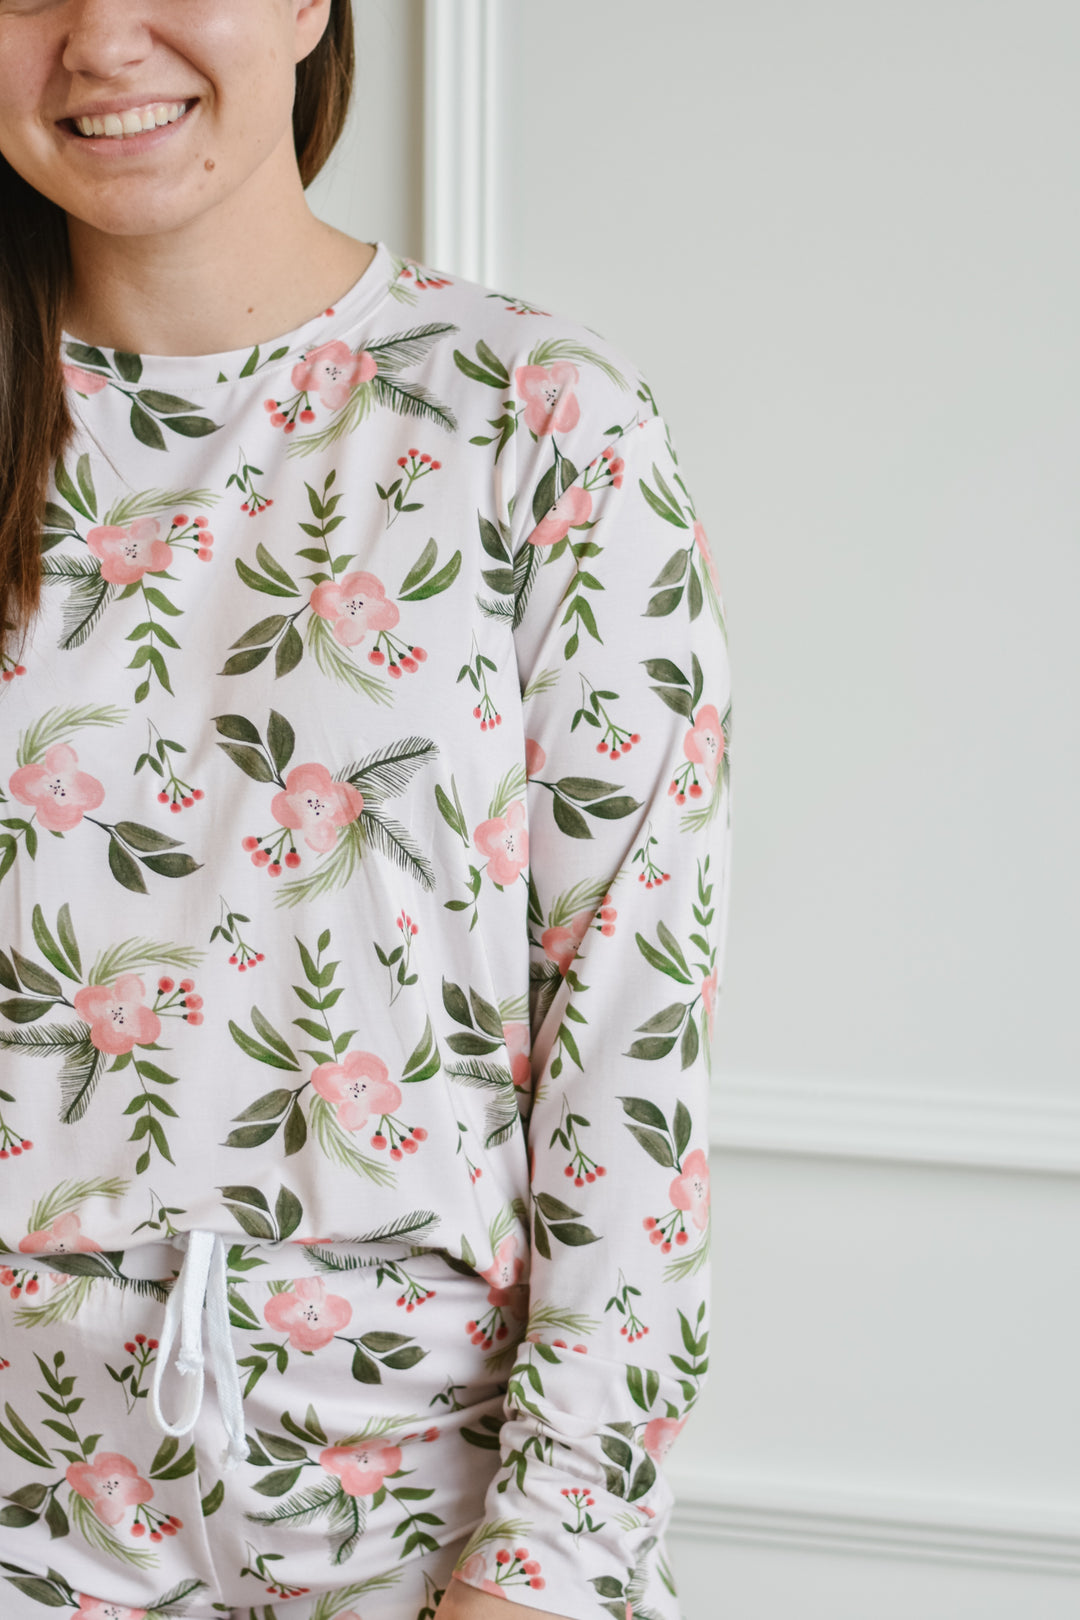 MAD Collection PJS - Blush Floral